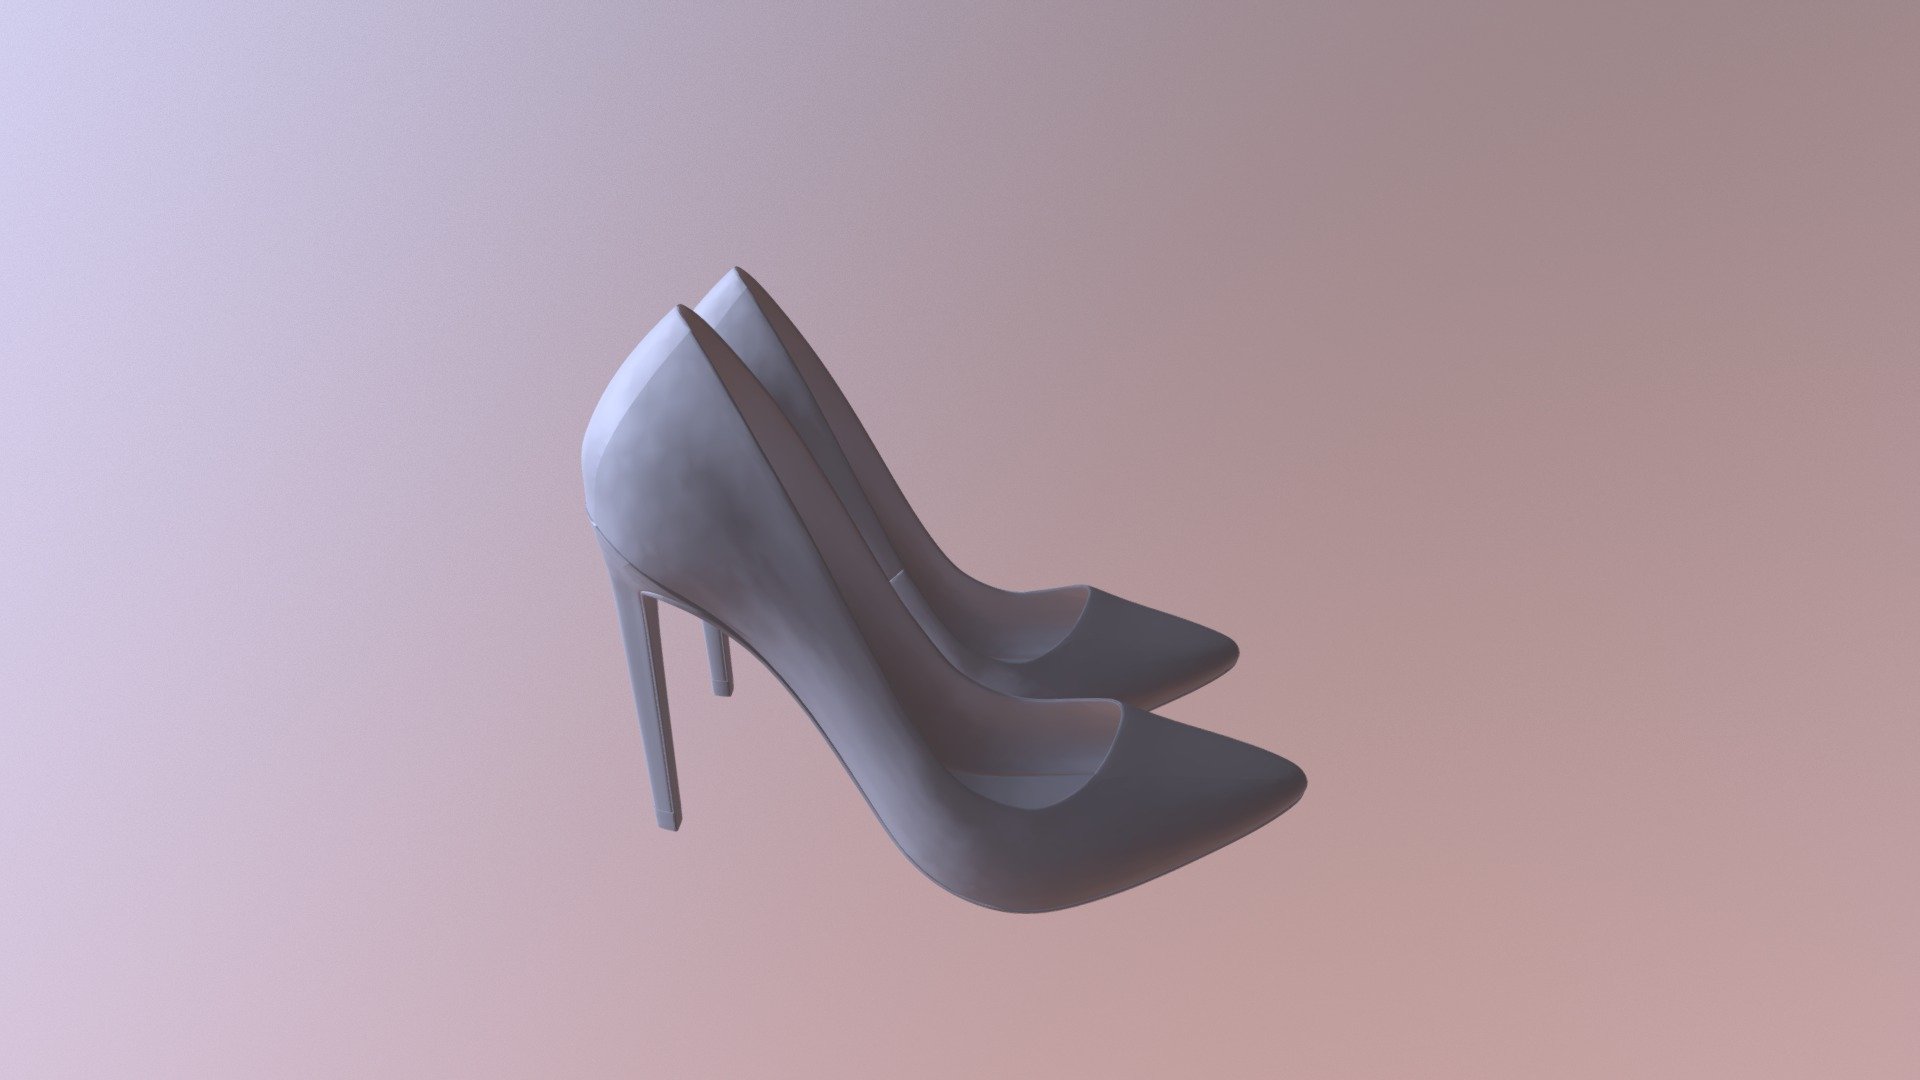 Most common kind of shoes in a women’s wardrobe. Classic woman shoes on high heels.
-made in 3ds max
-meshsmooth
-mid_detailed - Classic high heel pumps - Download Free 3D model by Andrey (@Earl_1) 3d model